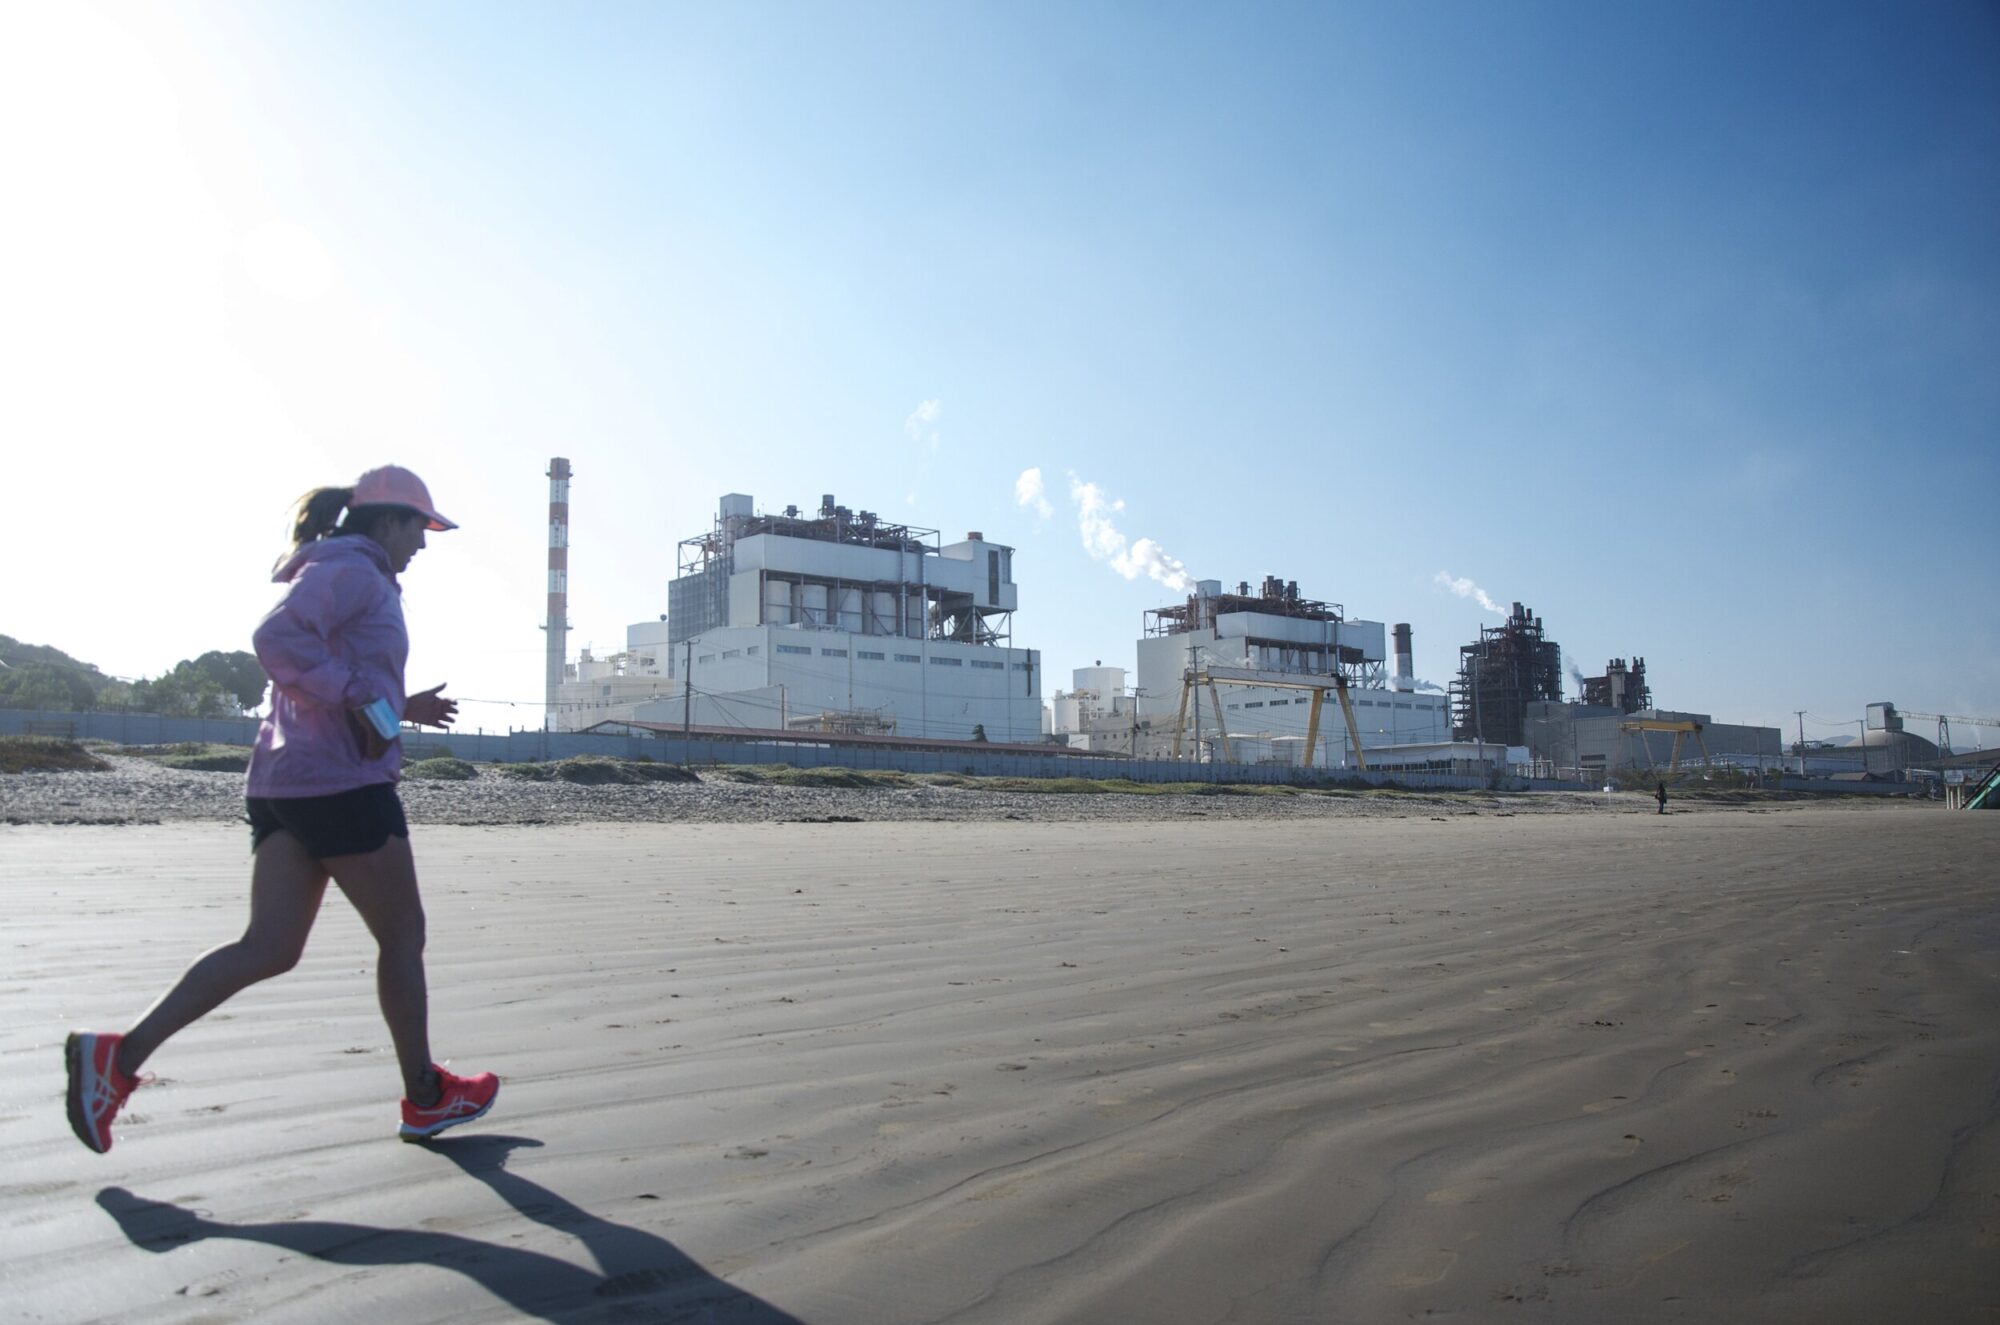 A woman runs on a beach in Chile, in front of an industrial park.